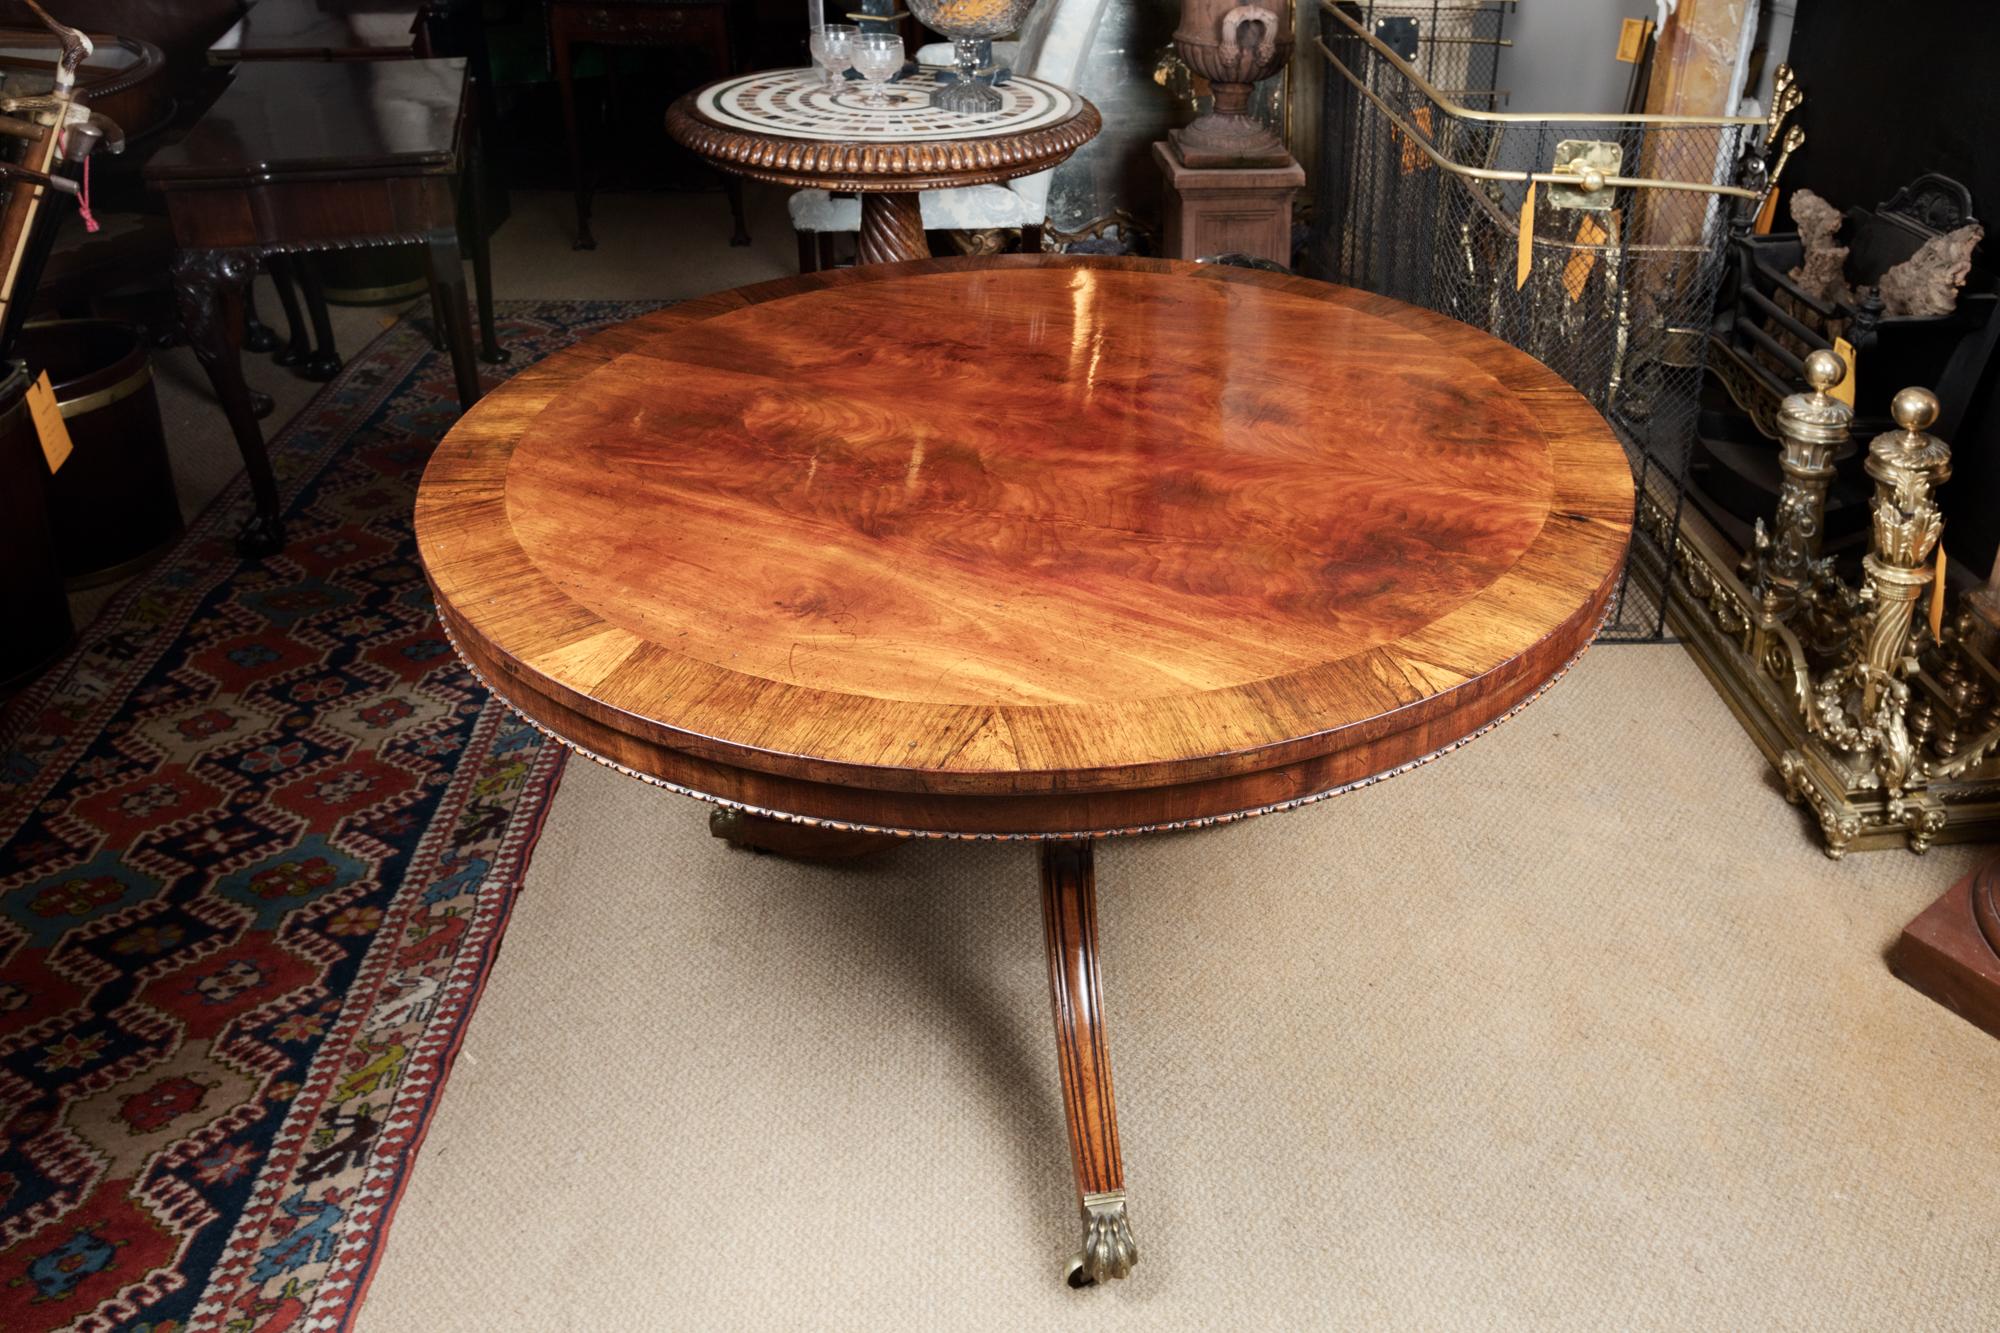 19th Century Mahogany & Rosewood Tip-Up Dining Table In Excellent Condition For Sale In Dublin 8, IE